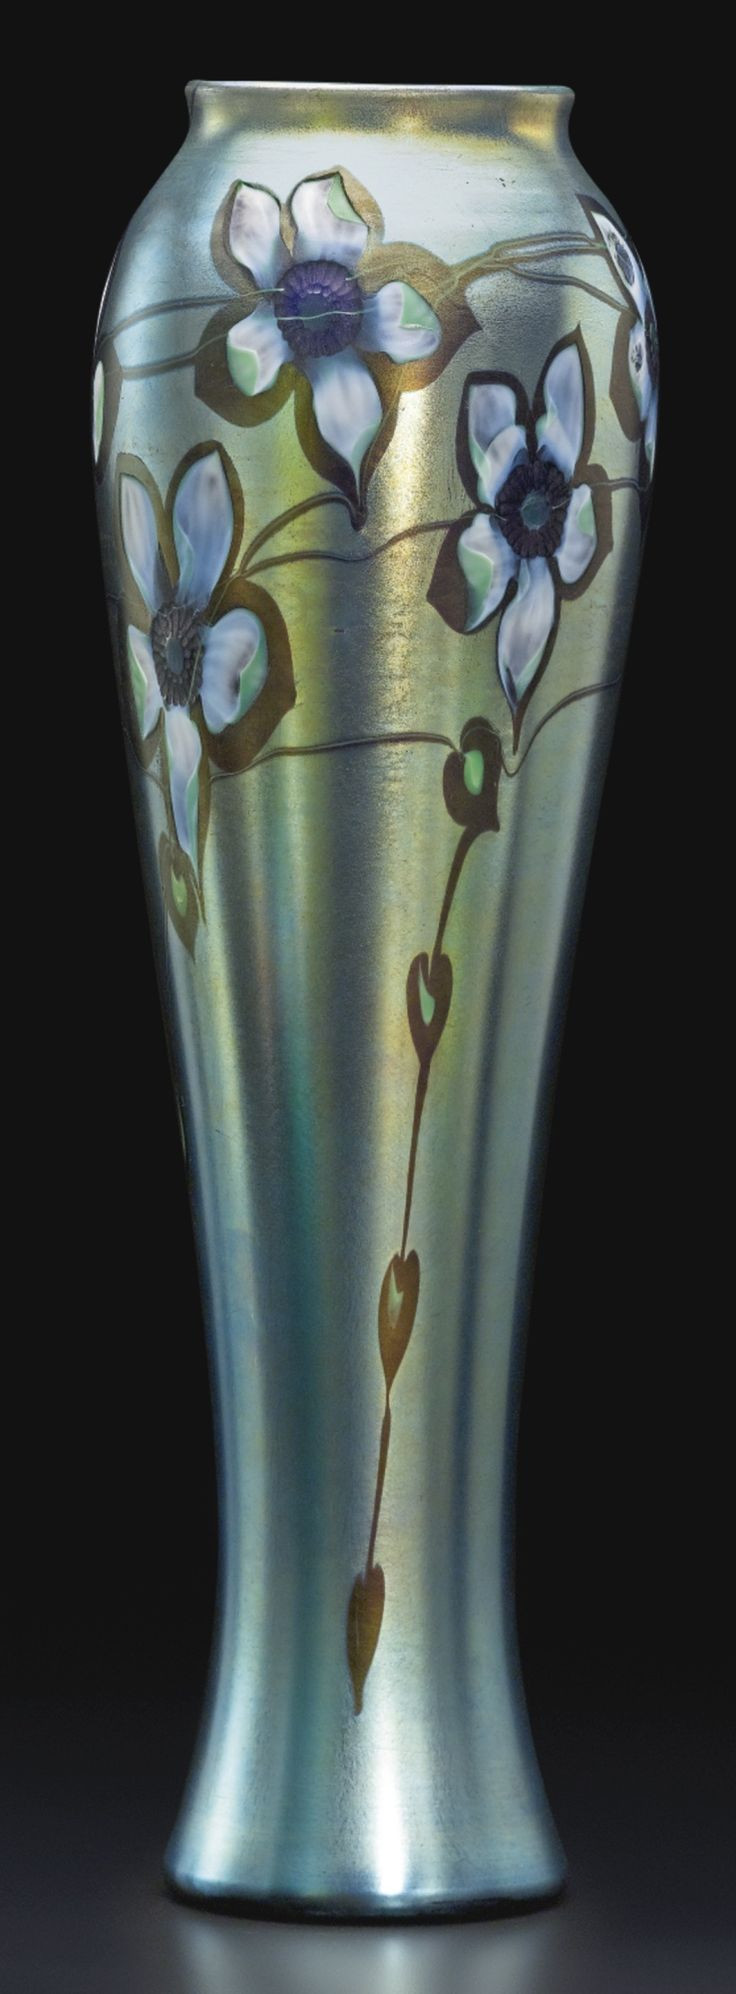 26 Stylish Dale Tiffany Glass Vase 2023 free download dale tiffany glass vase of 662 best tiffany images on pinterest louis comfort tiffany intended for tiffany studios carved cameo vase engraved 8036e l c tiffany favrile favrile glass 17 1